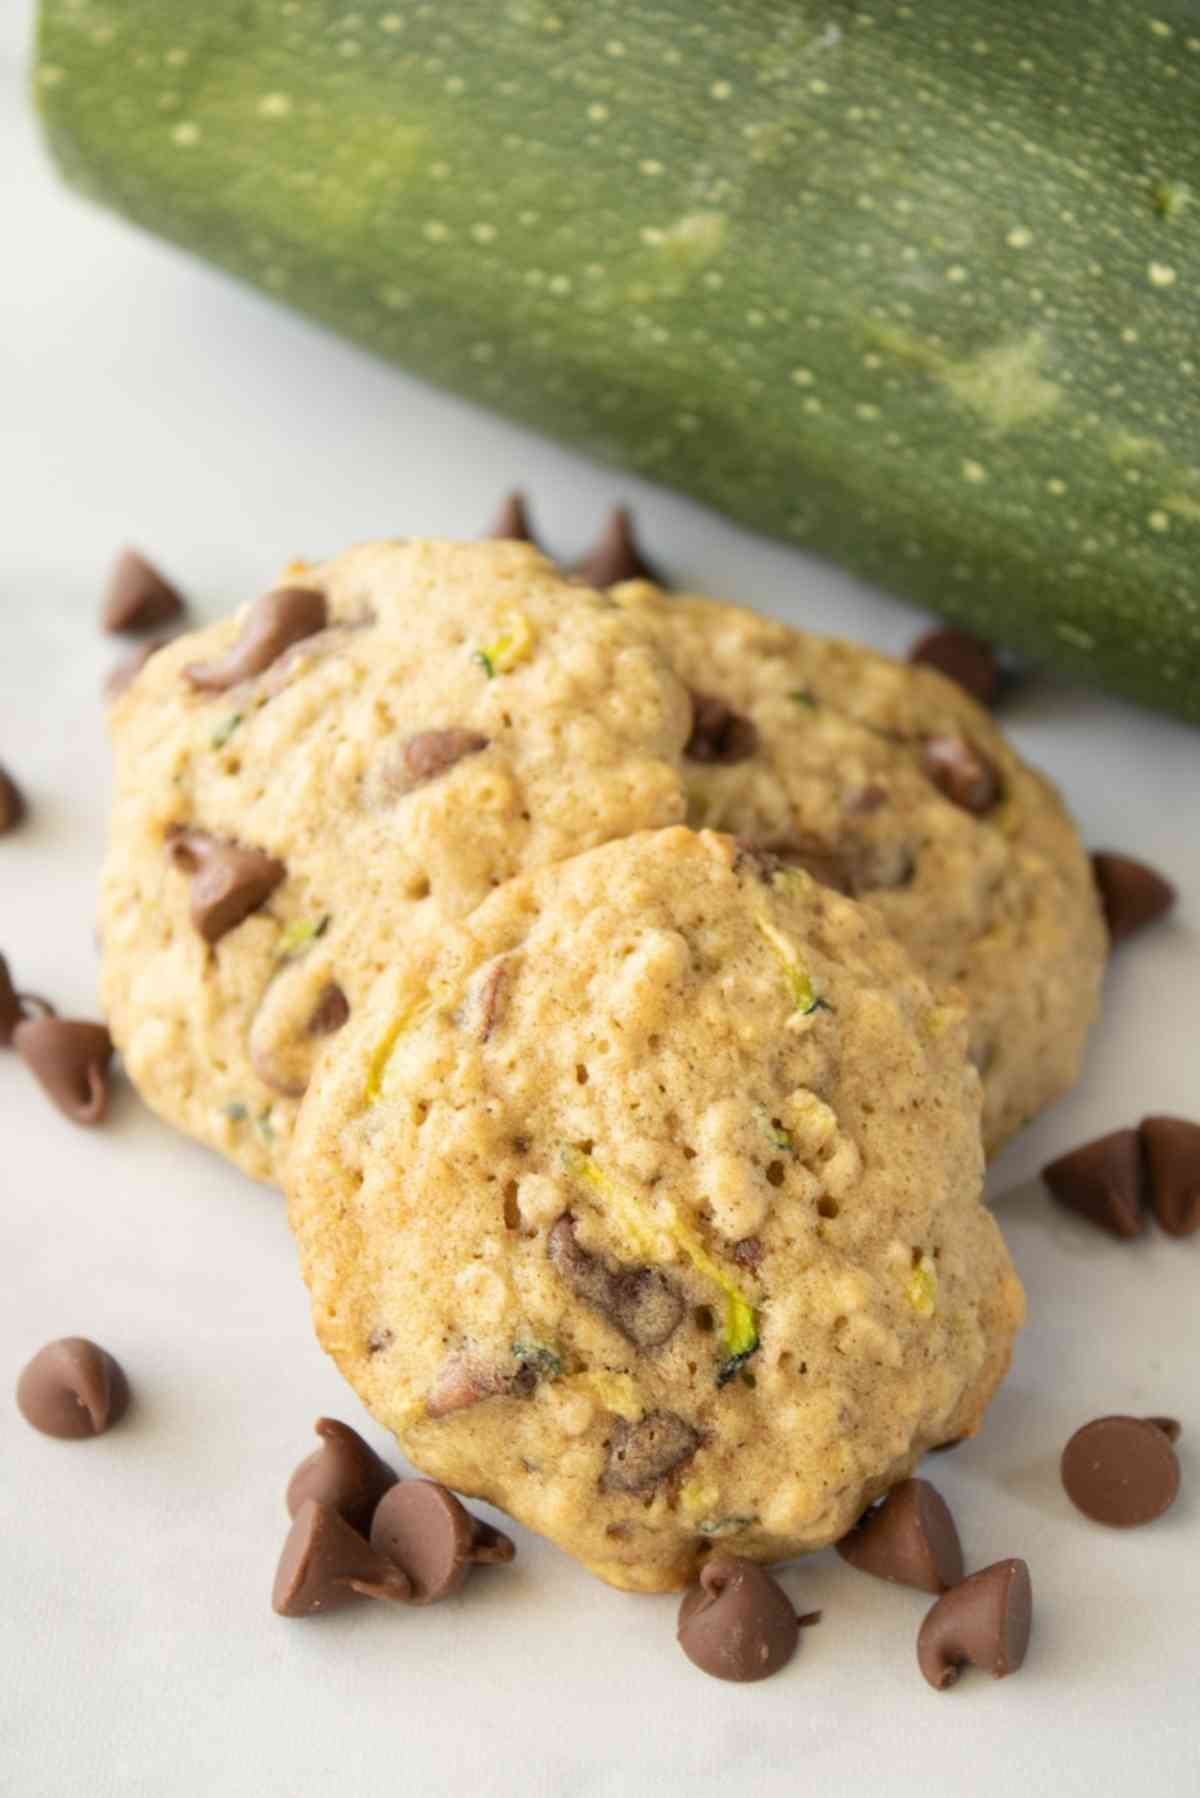 Pile of zucchini chocolate chip cookies next to a zucchini.